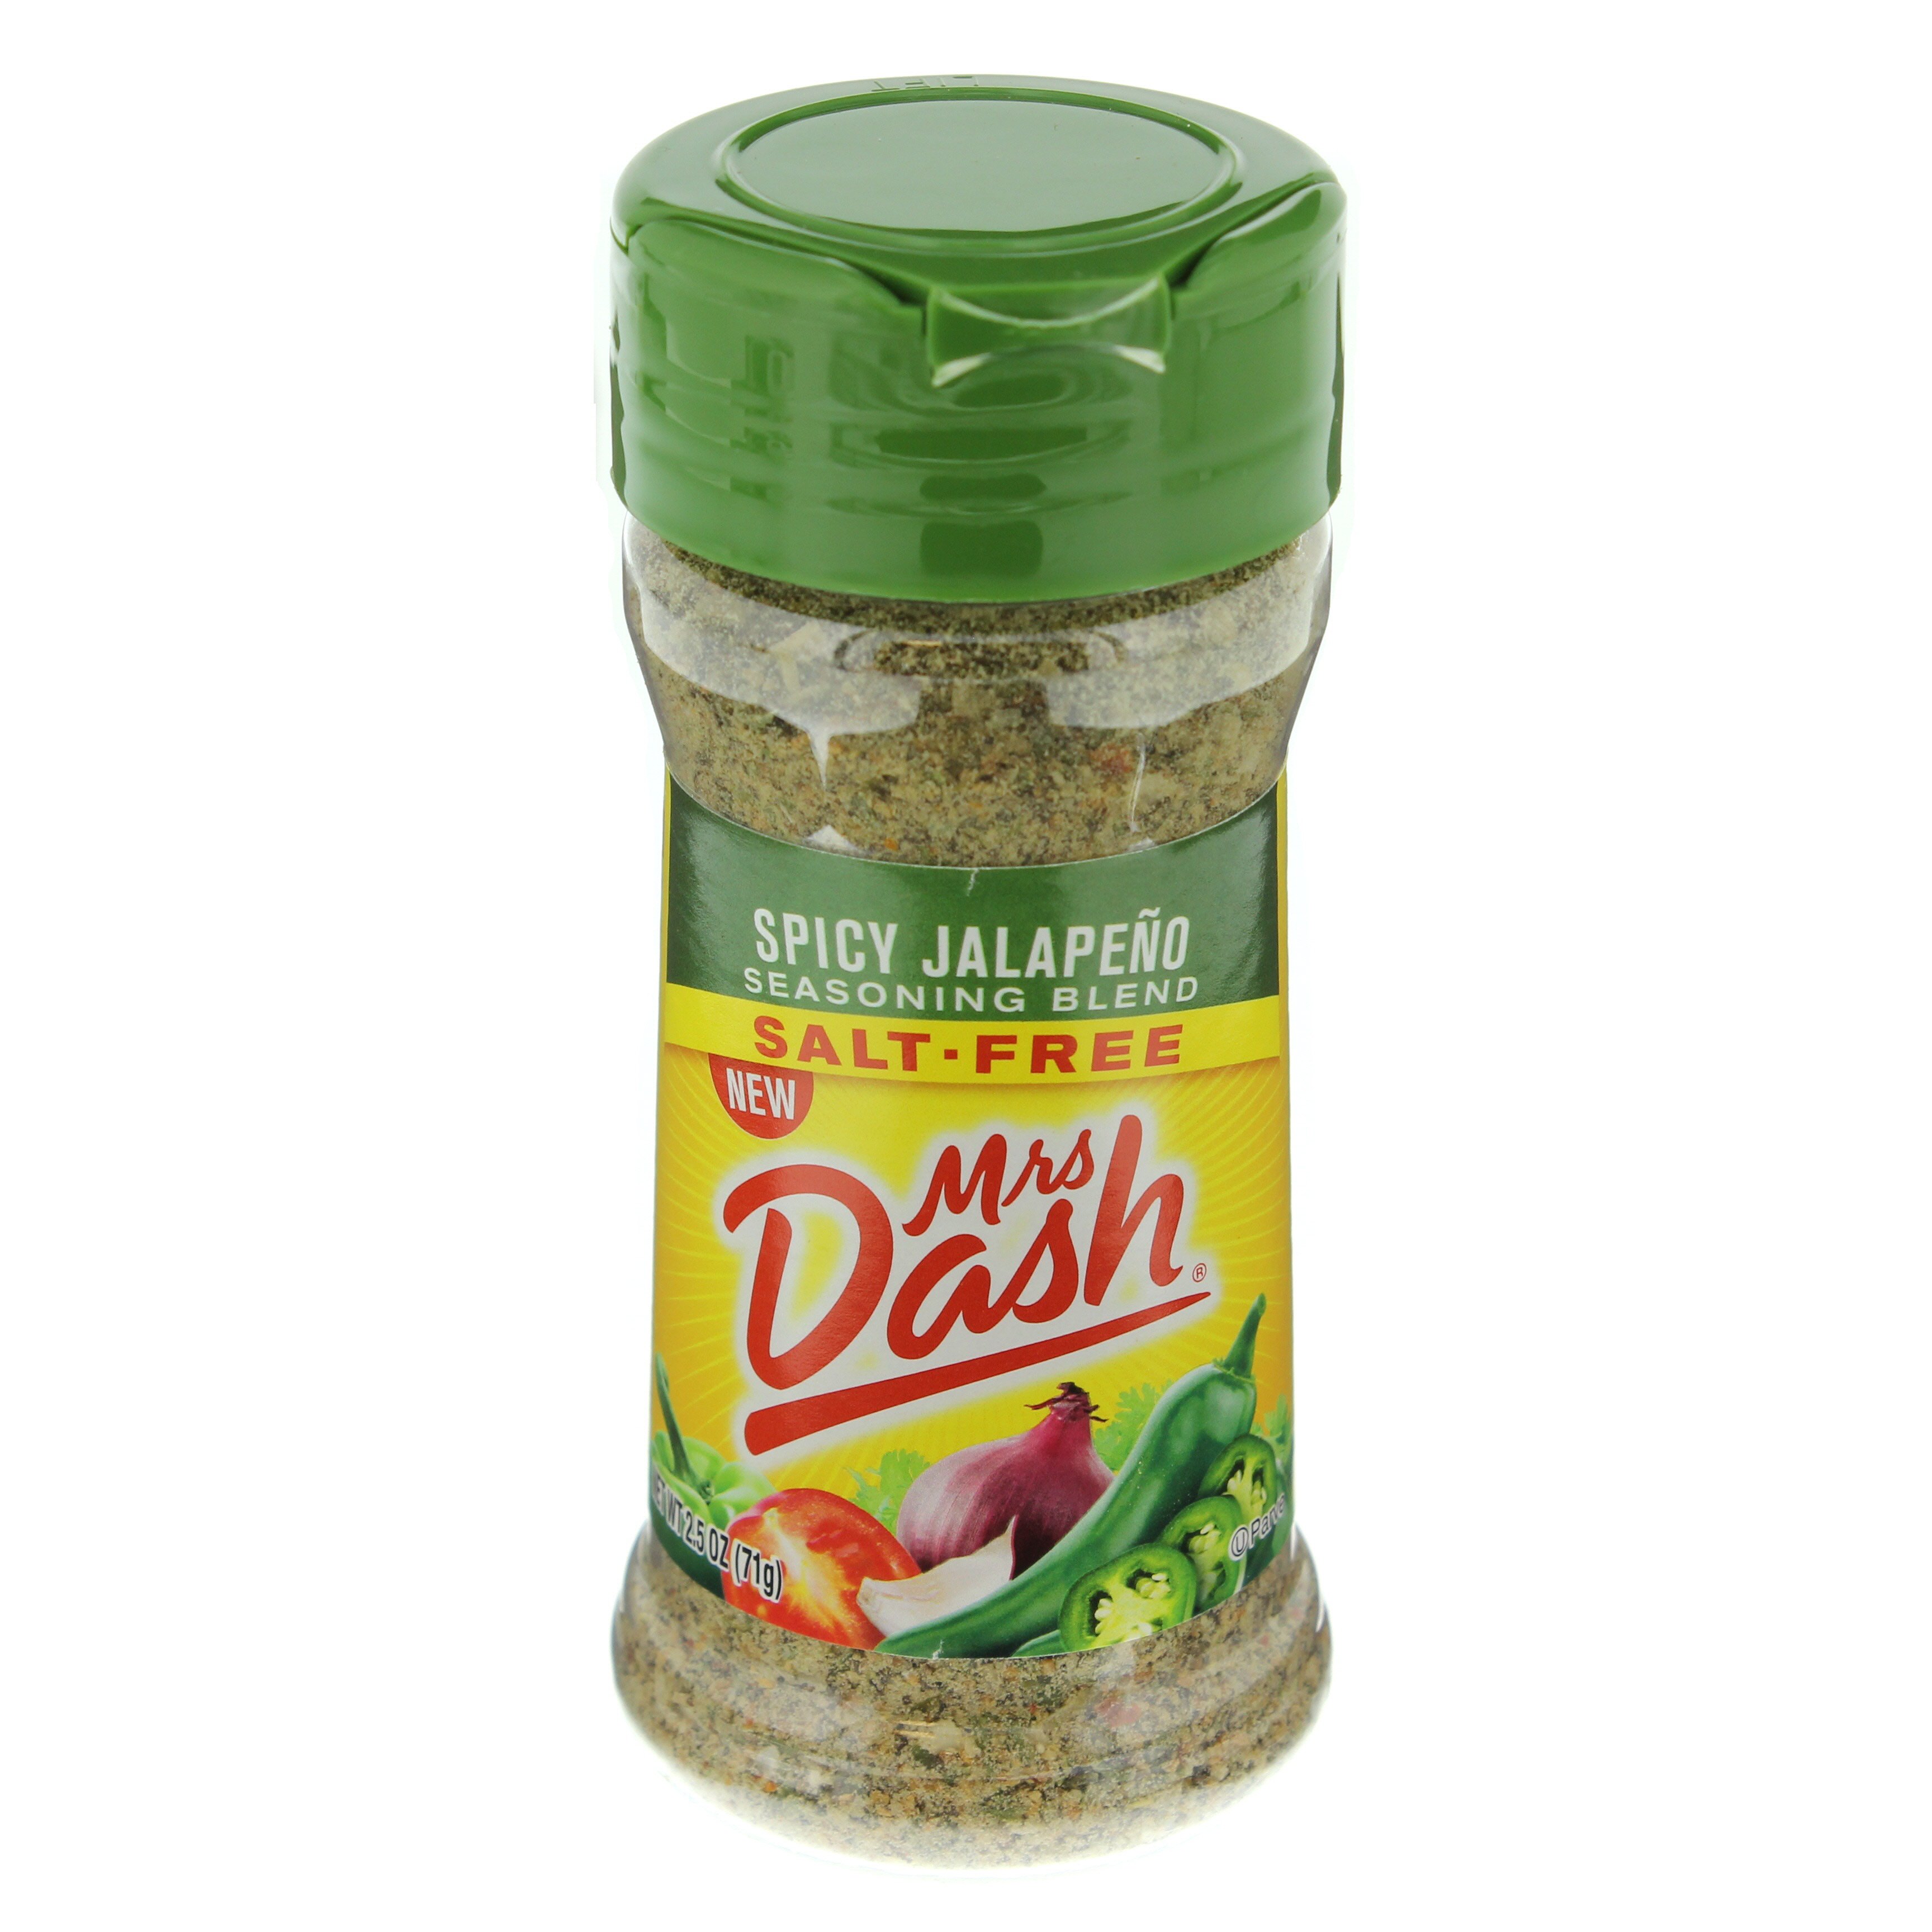 Dash Salt-Free Seasoning Blend, Spicy Jalapeno, 2.5 Ounce (Pack of